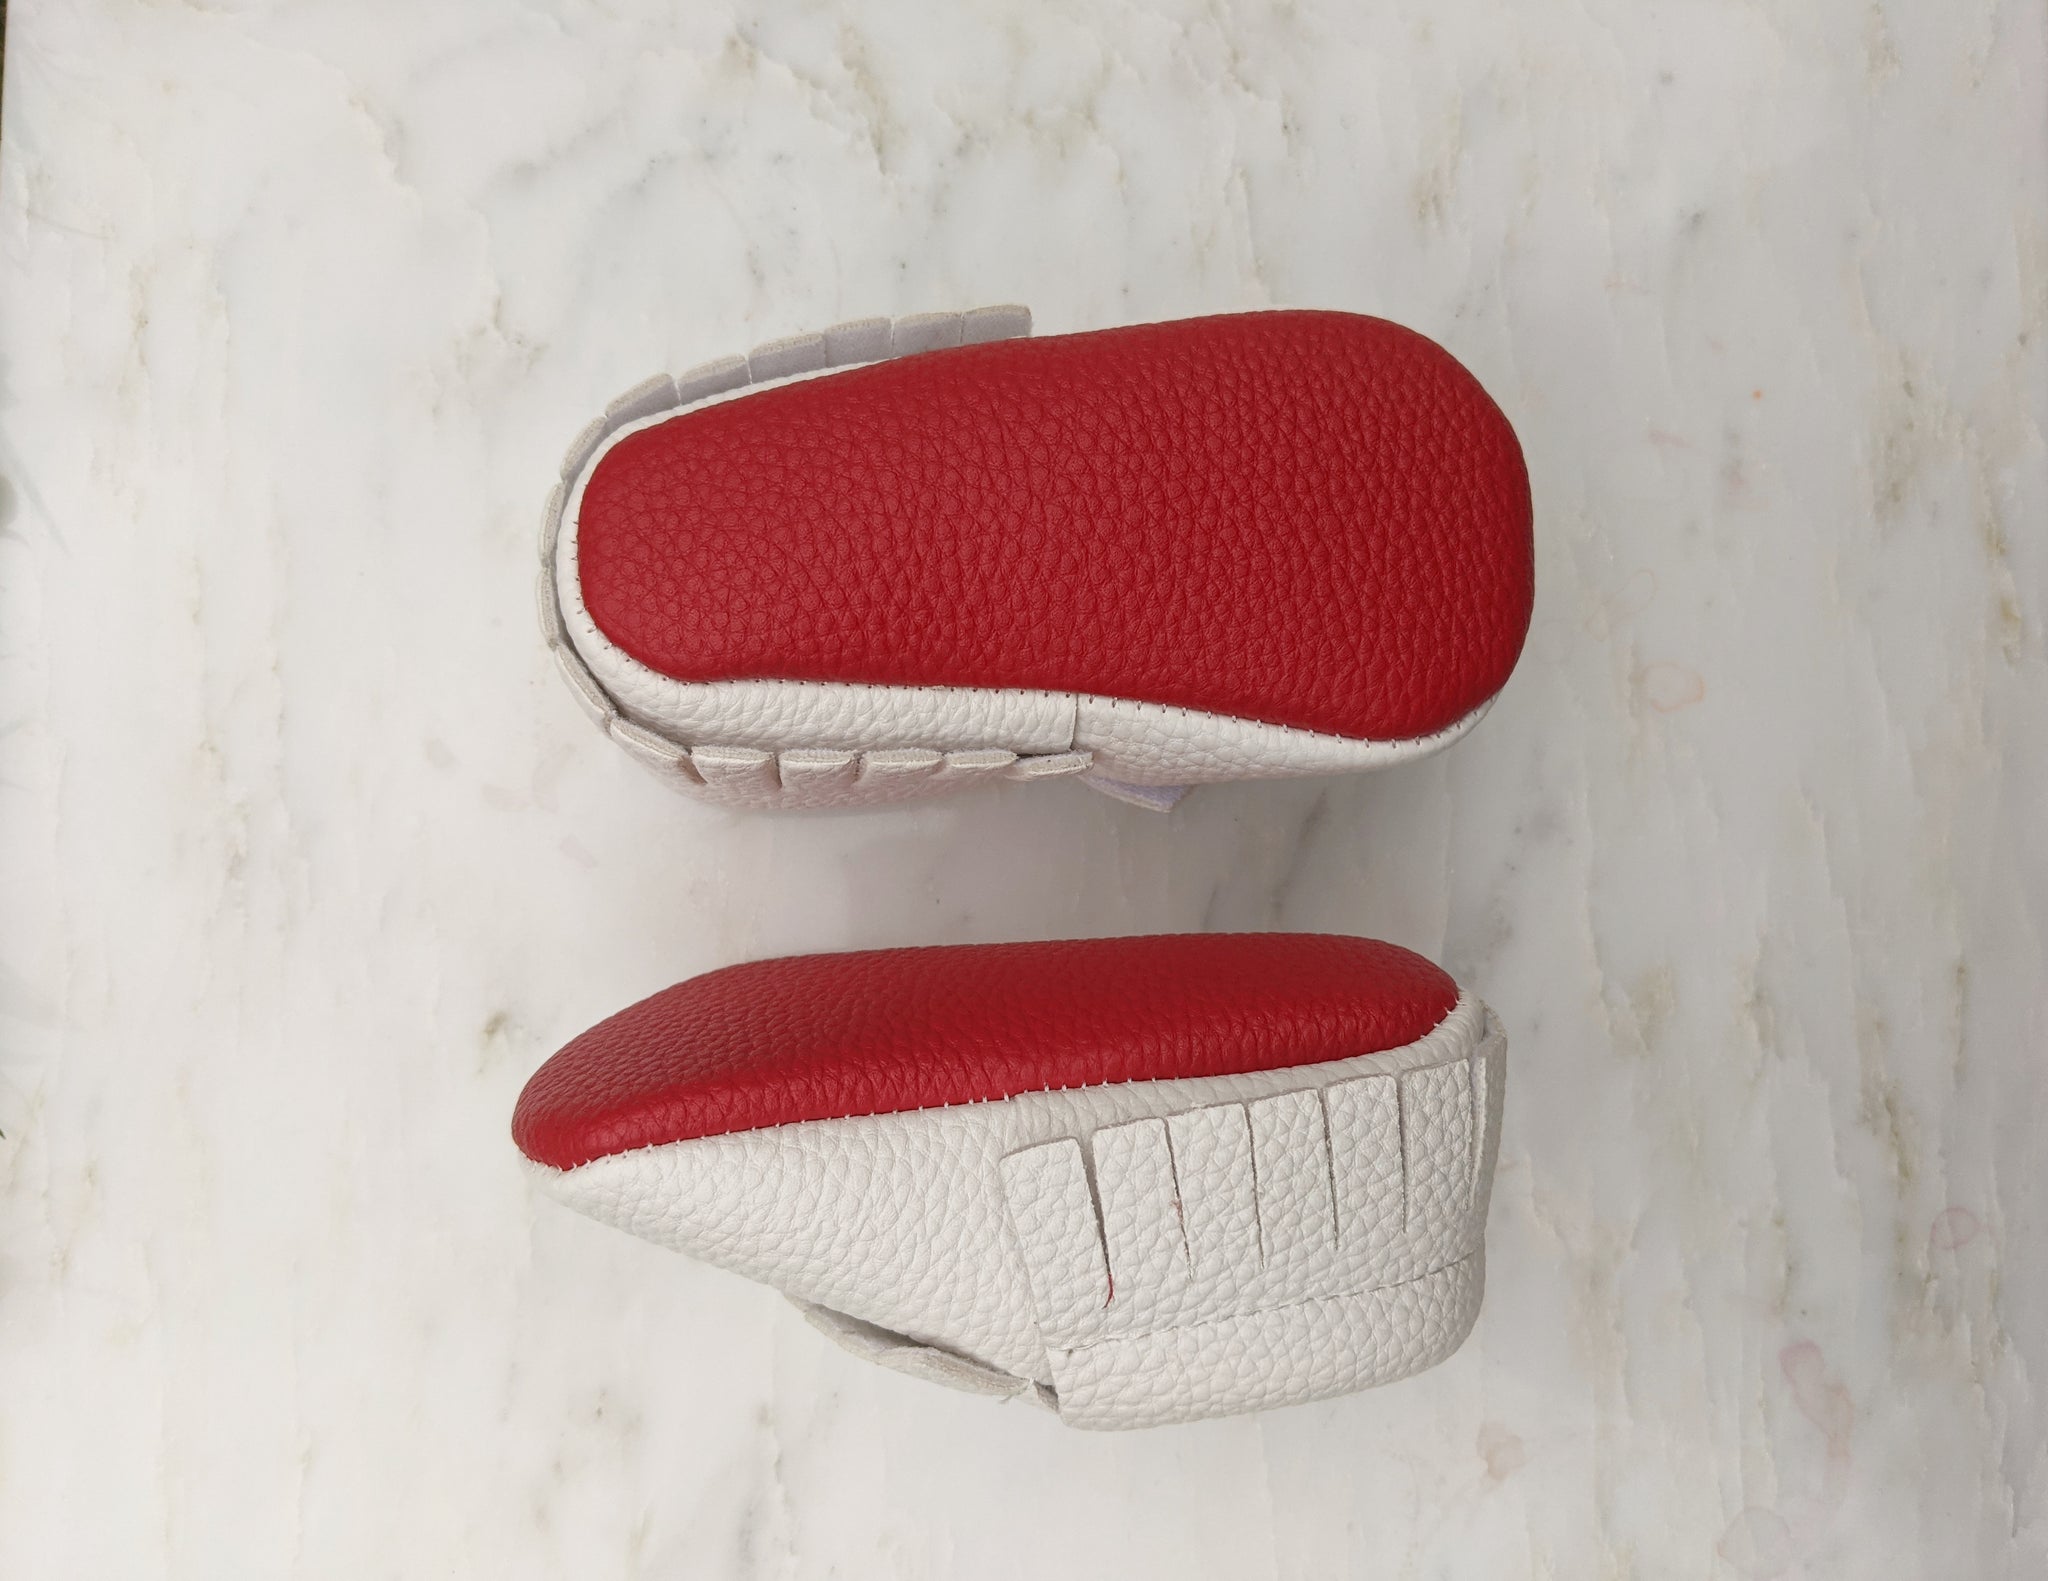 Red Bottom Baby Moccasin Shoes Red Bottom Louboutin Style Red 